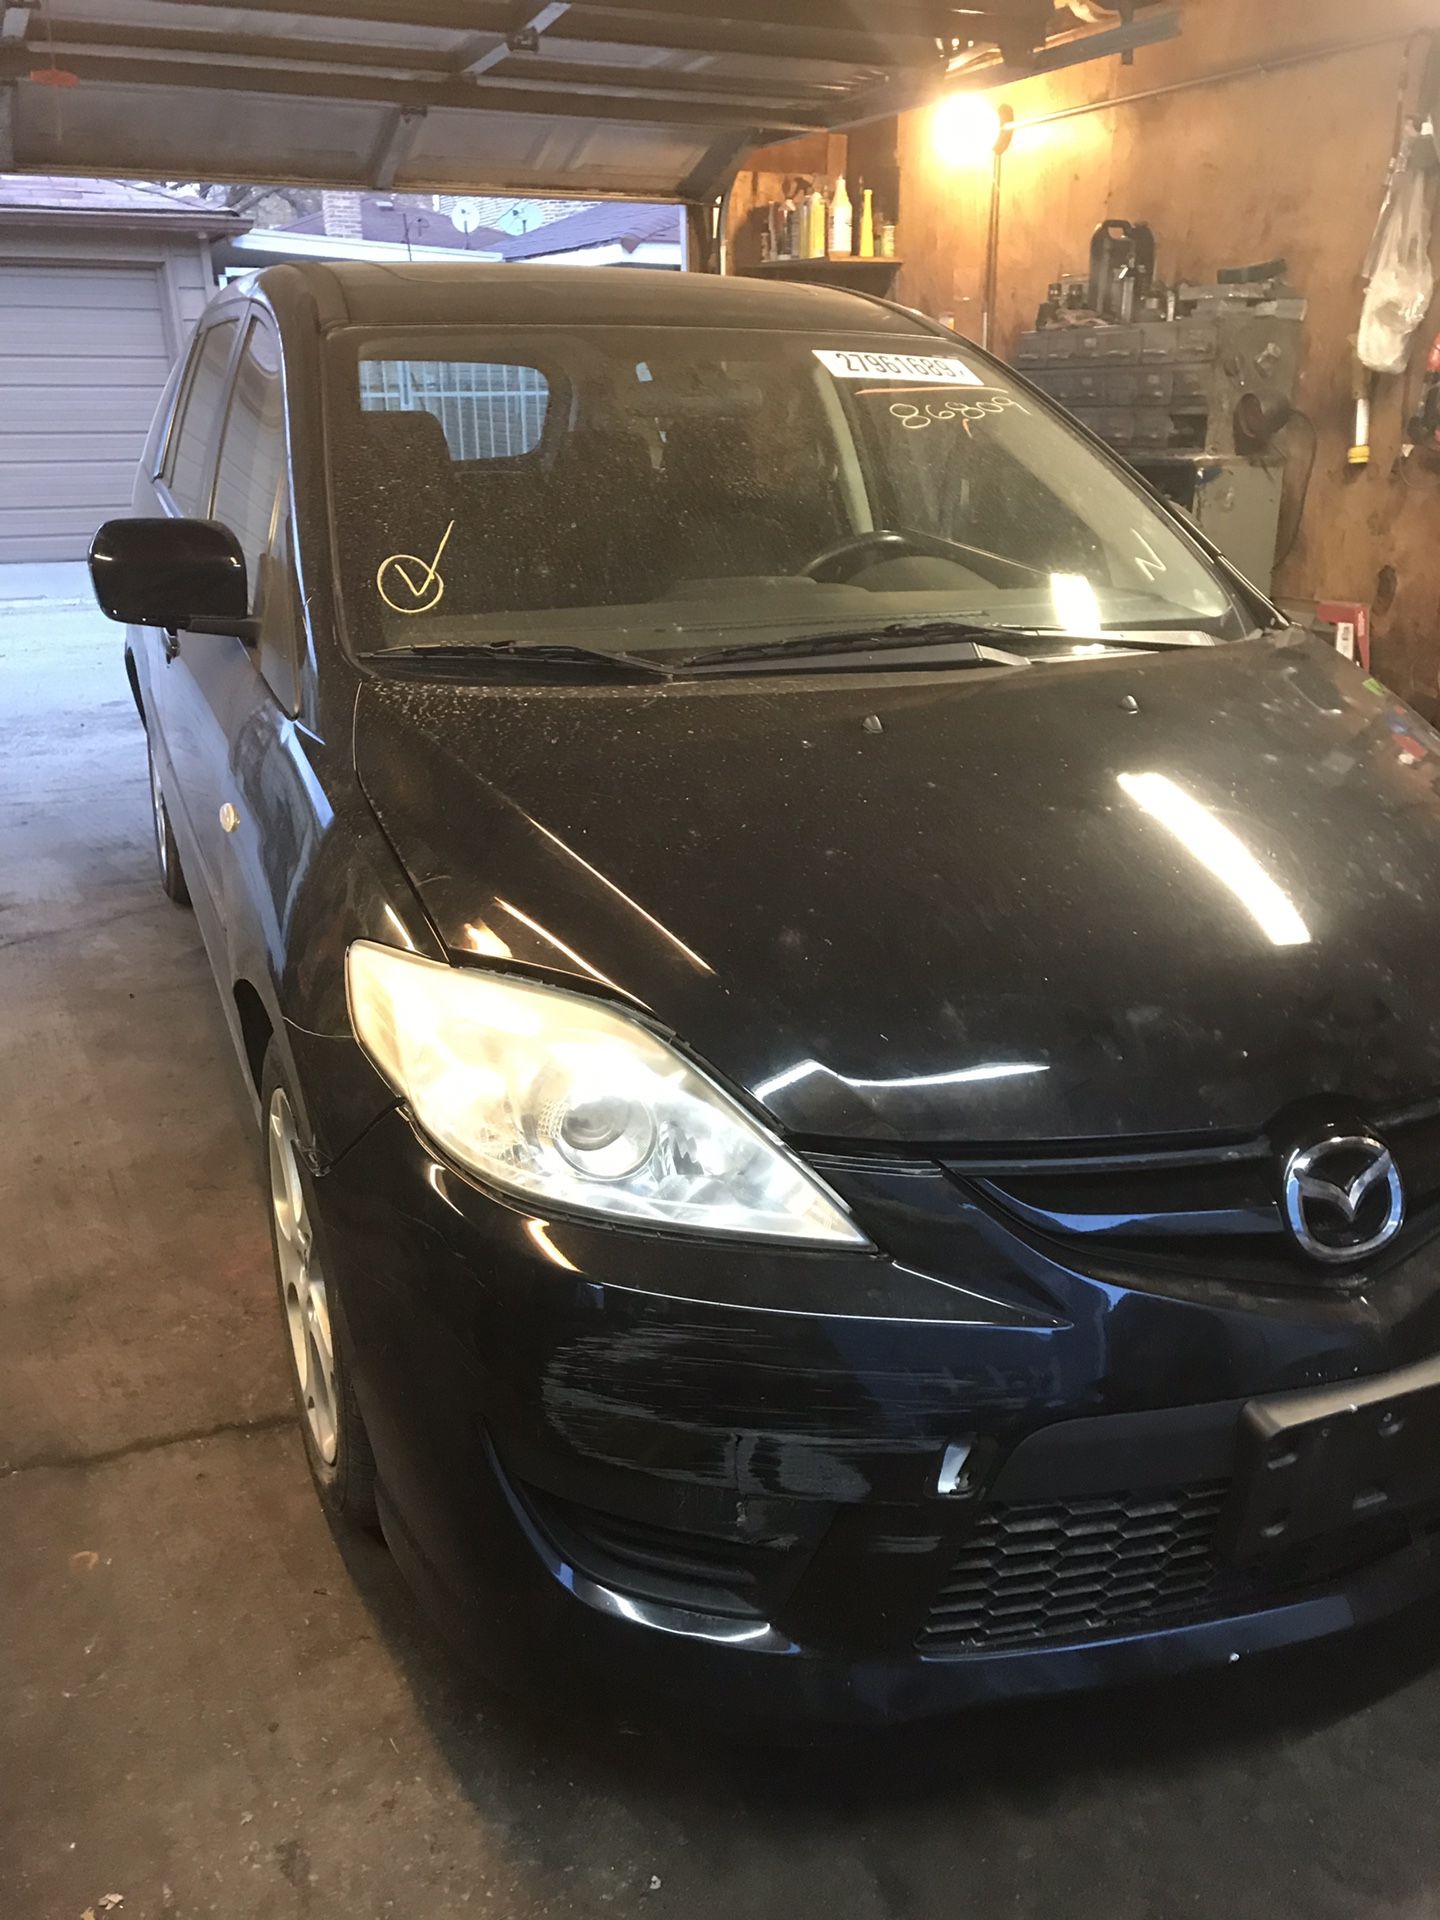 2008 Mazda 5 parts for sale only